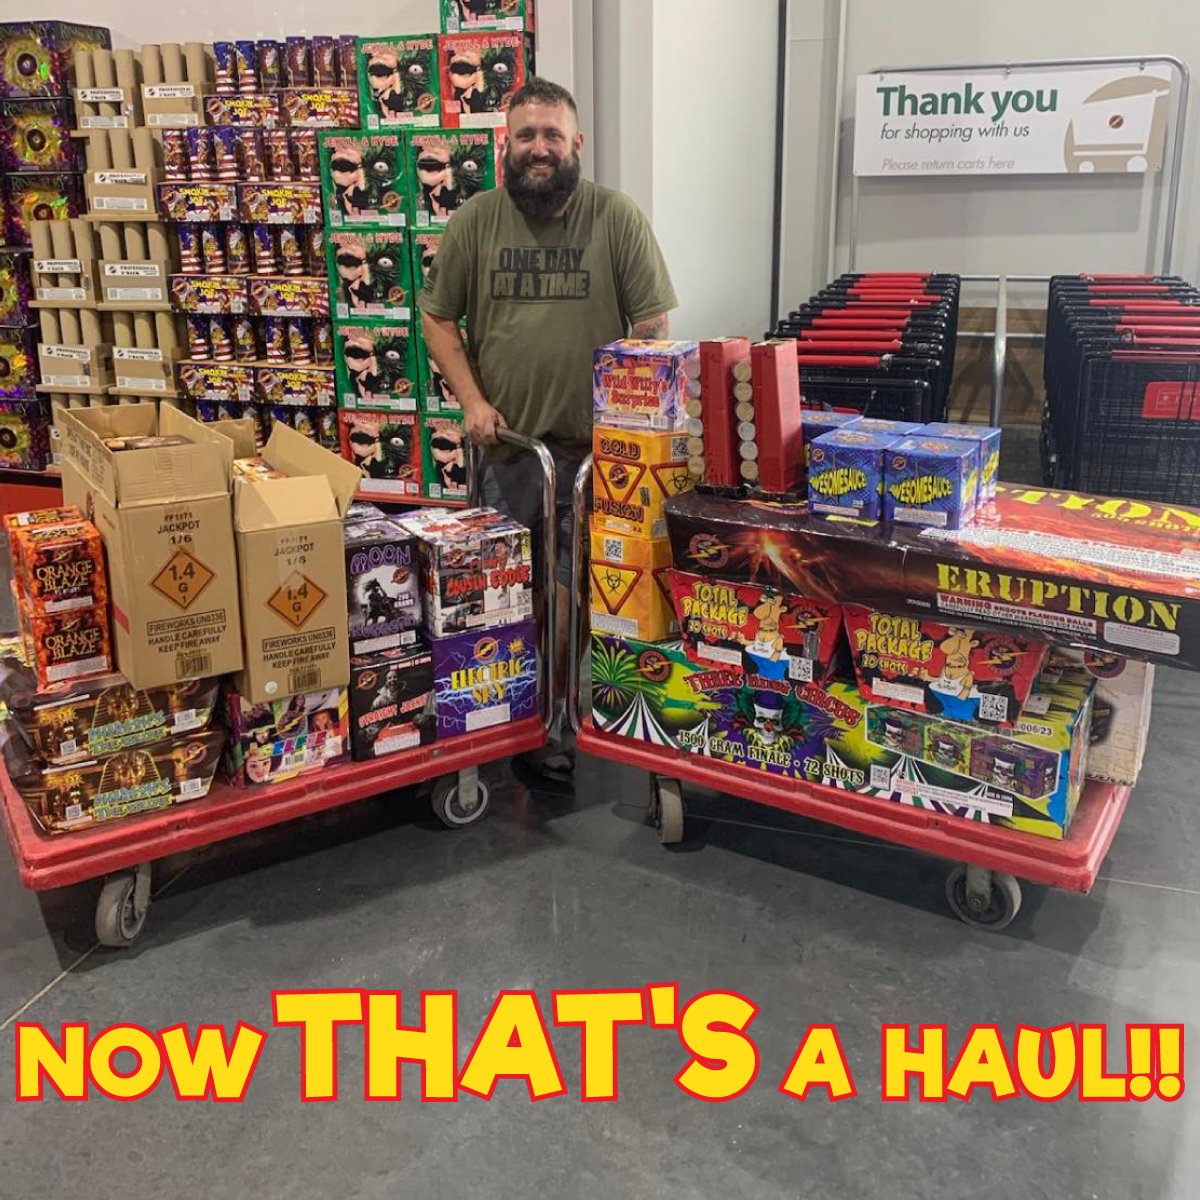 Now THAT'S a haul! Thanks for sharing!

#wwf #wildwillysfireworks #fireworks #wildwillys #fanphotos